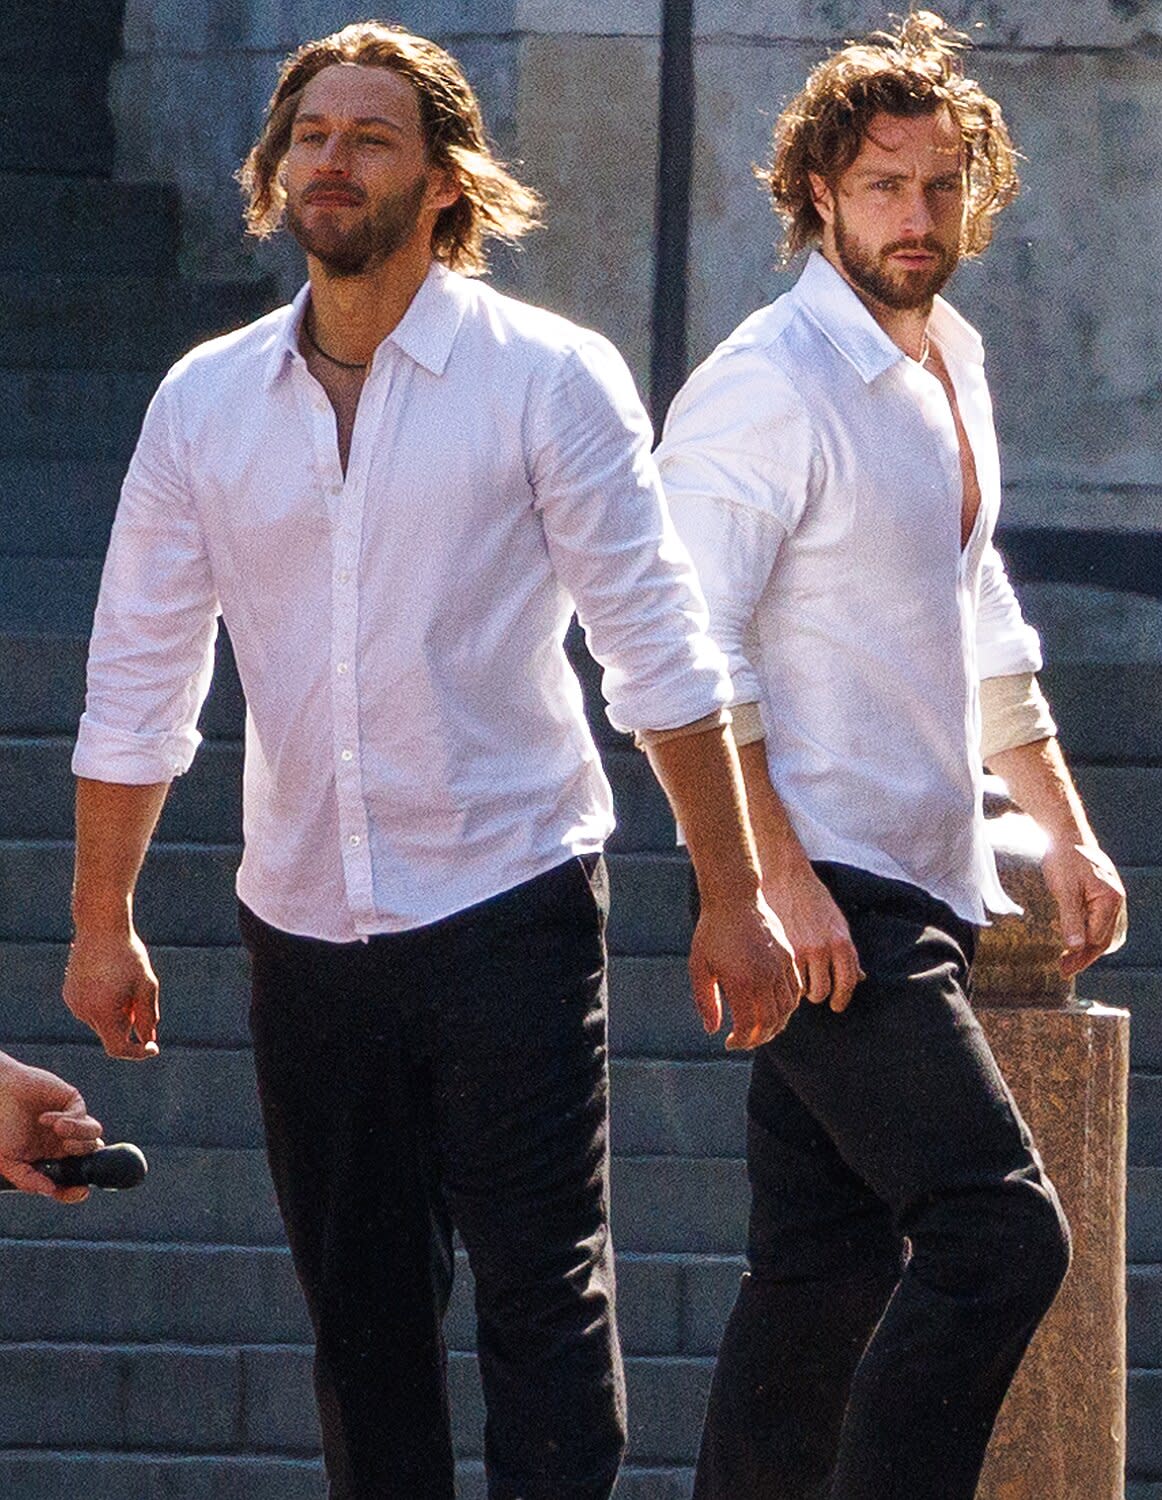 Aaron Taylor-Johnson spotted filming "Kraven the Hunter" in London with his lookalike stunt double this morning.